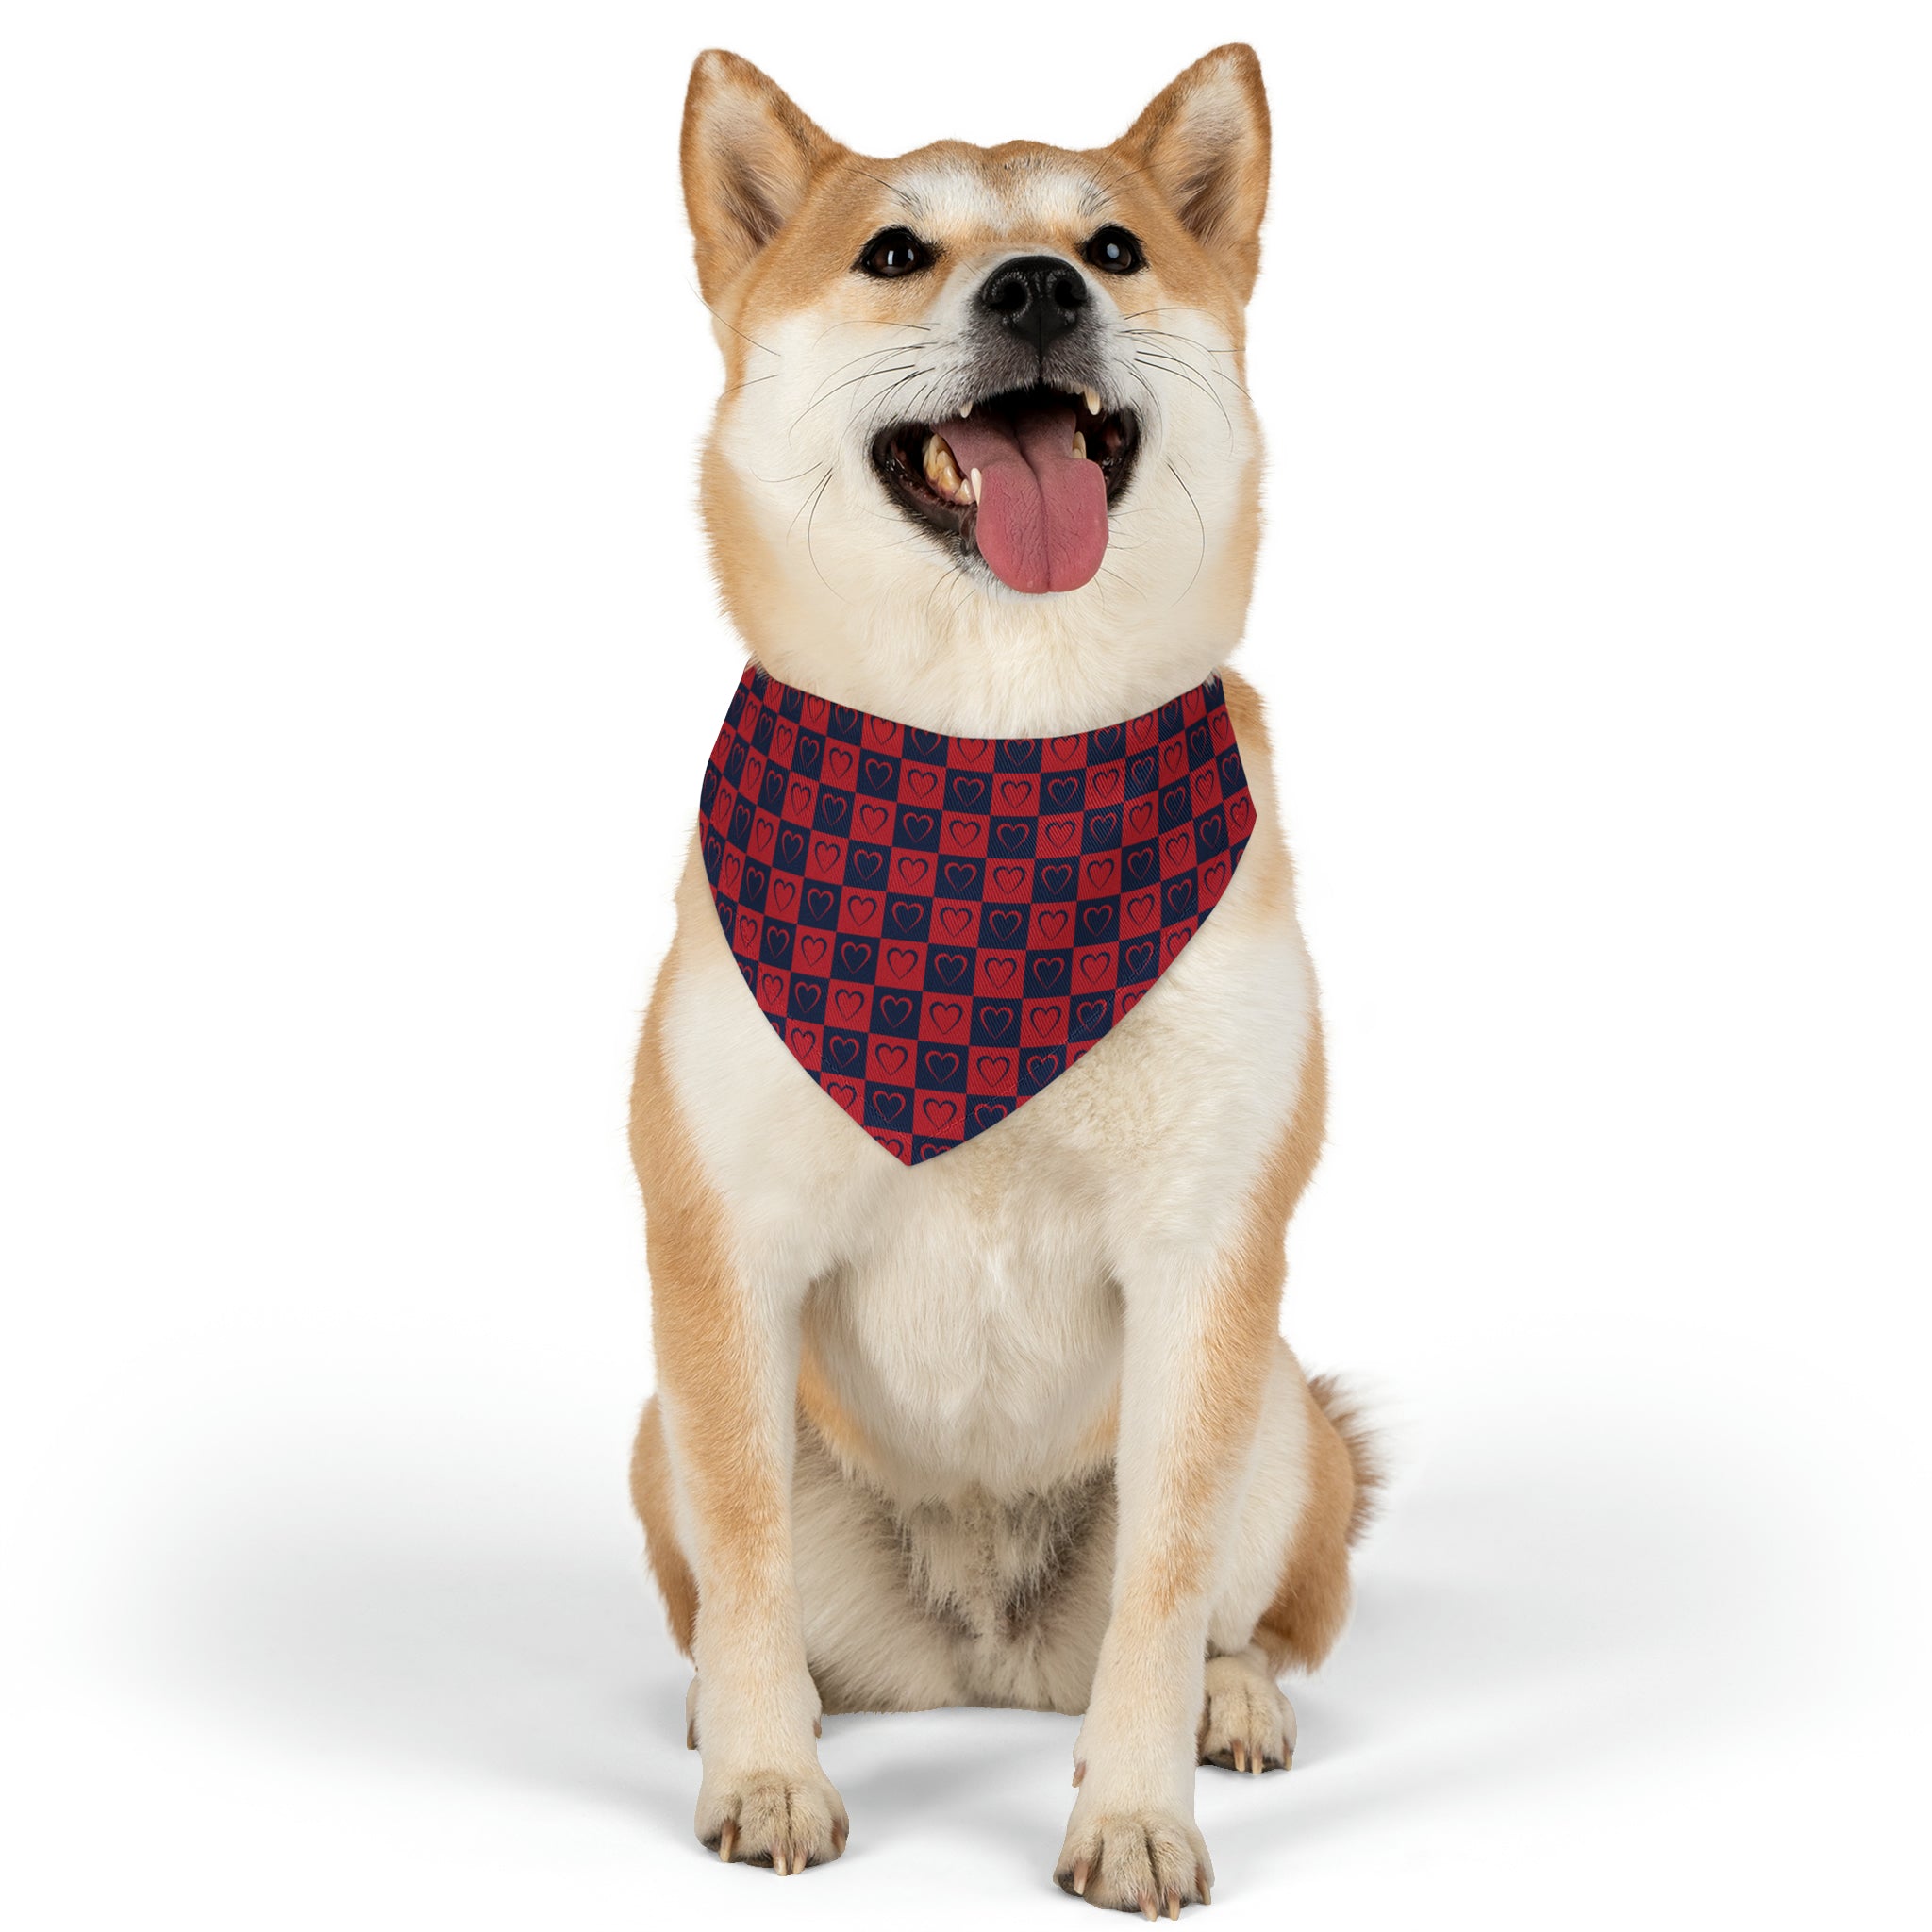 DC Hockey Themed Pet Bandana | Comes in Different Sizes for Different Breeds | Free Shipping